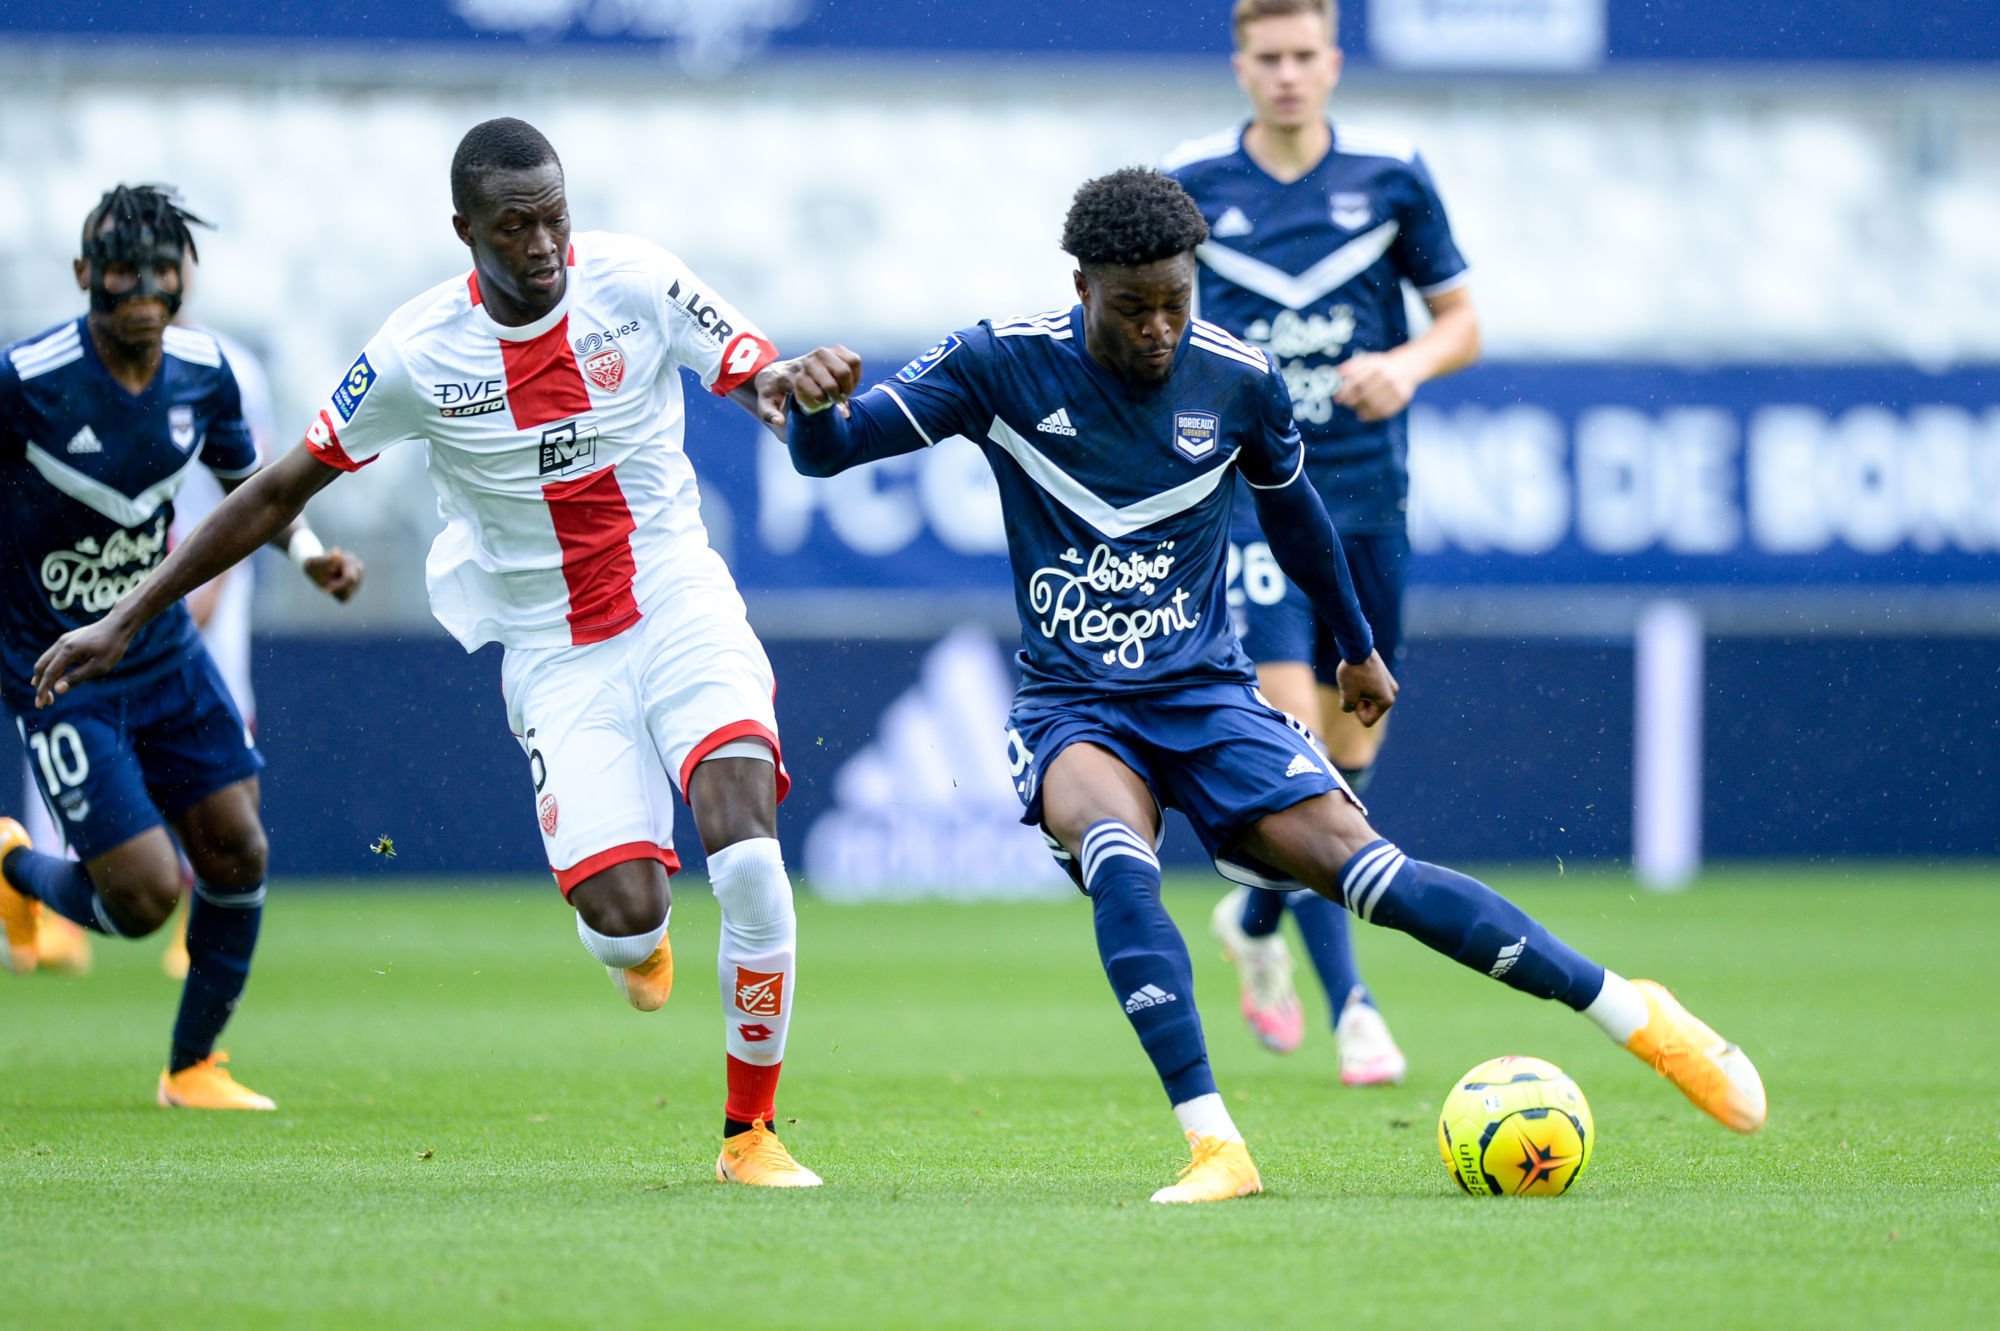 Joshua MAJA of Bordeaux   during the Ligue 1 match between Girondins Bordeaux and Dijon FCO at Stade Matmut Atlantique on October 4, 2020 in Bordeaux, France. (Photo by Sandra Ruhaut/Icon Sport) - Matmut ATLANTIQUE - Bordeaux (France)